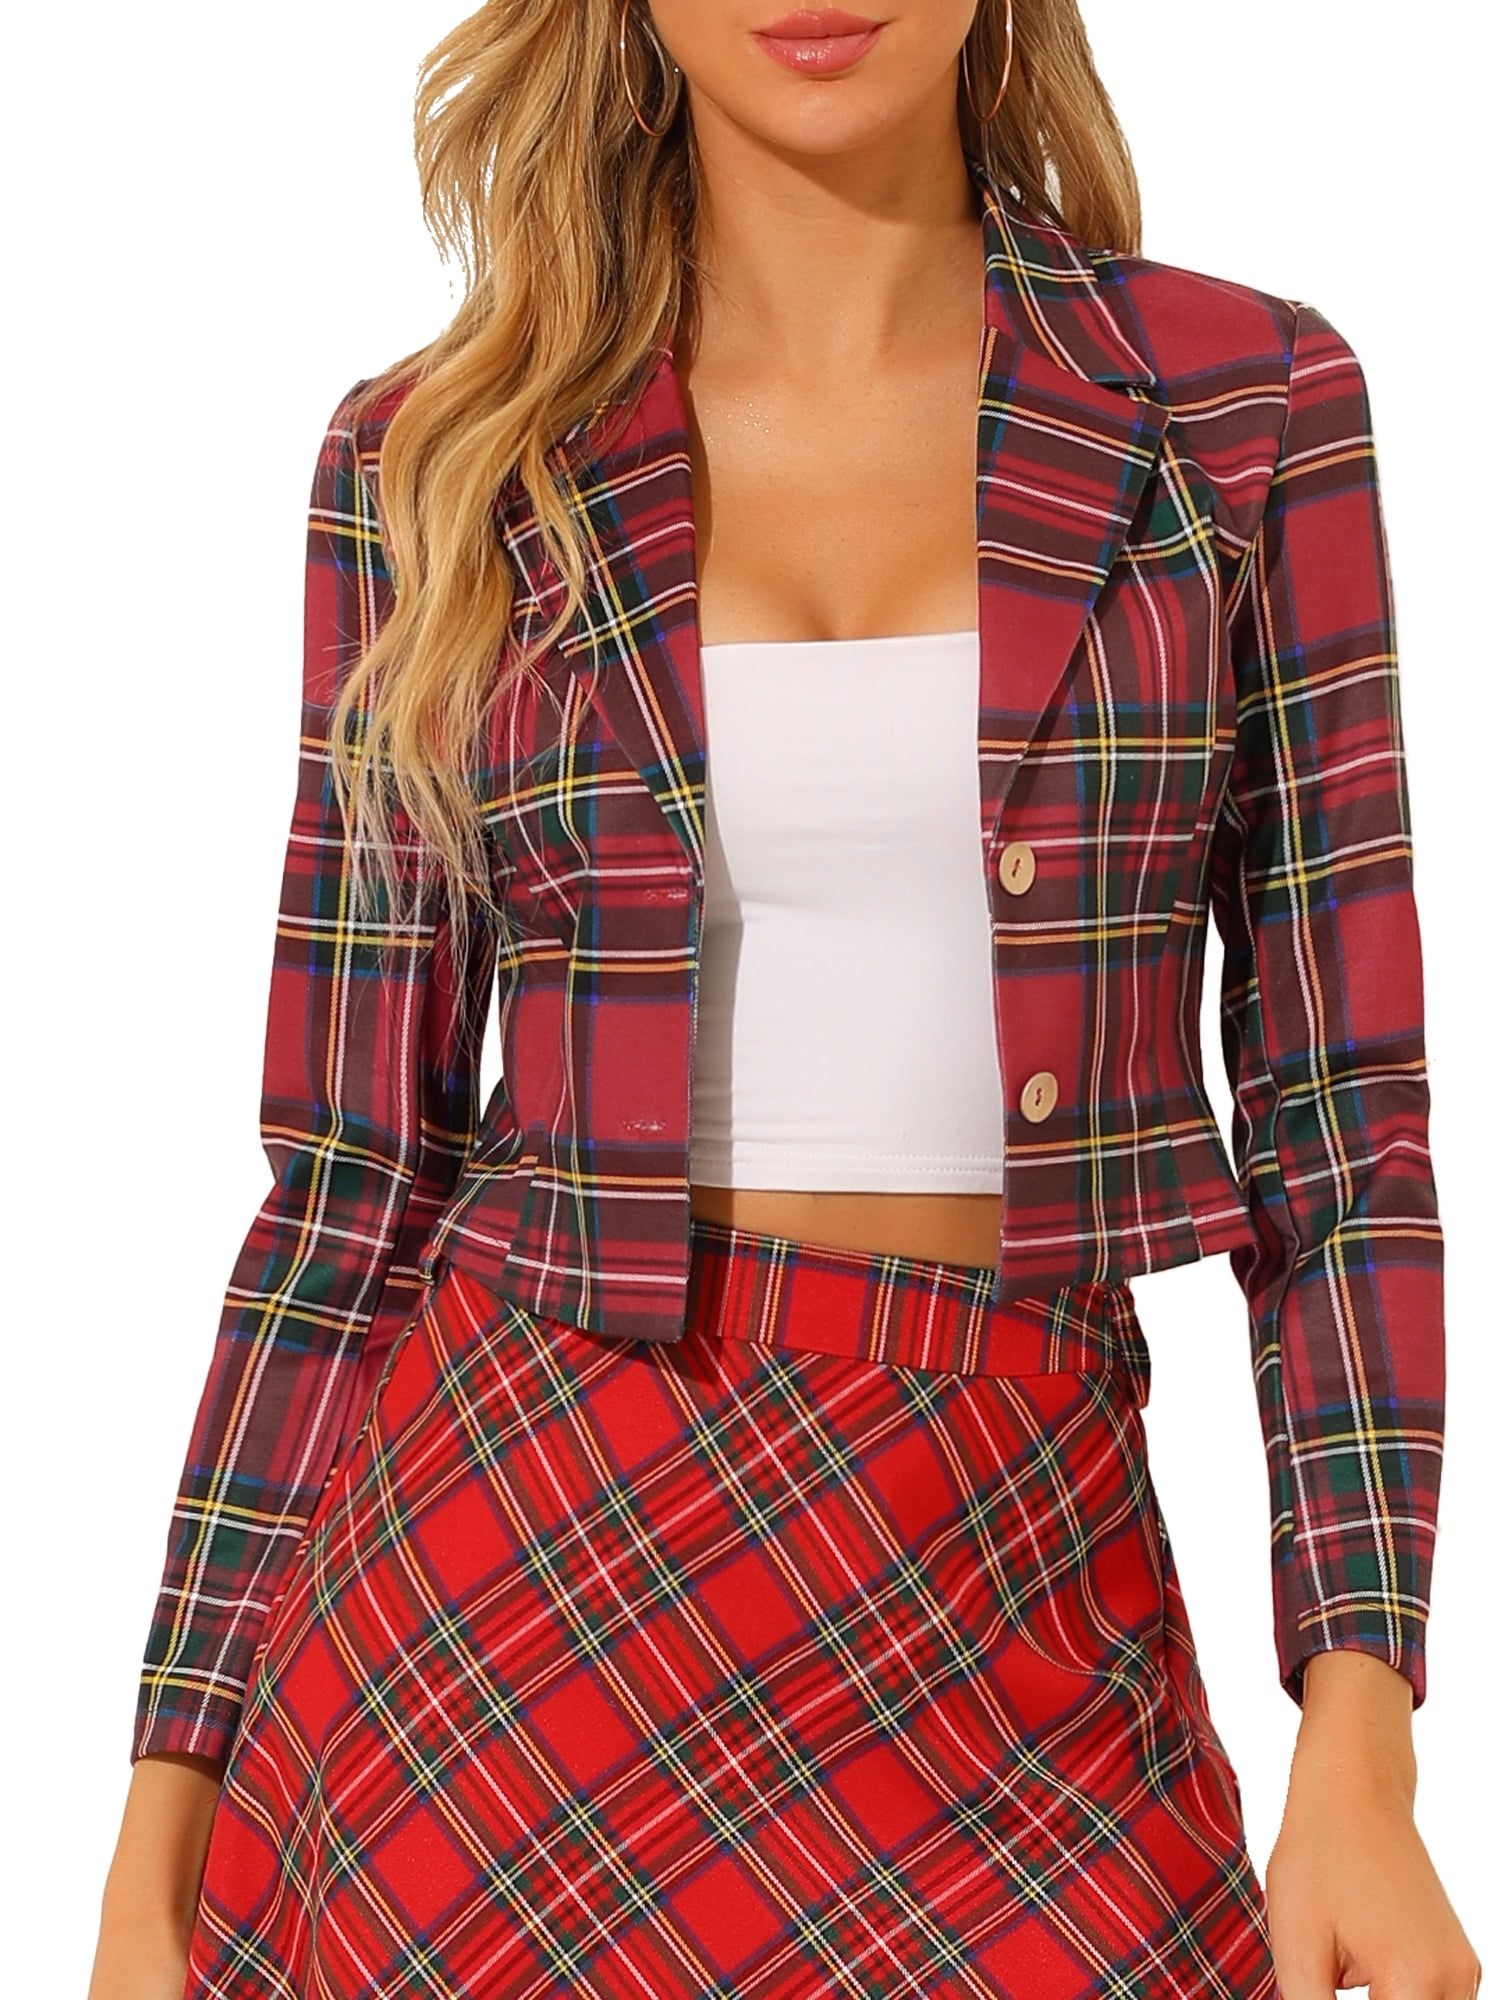 Long Sleeve Checkered Tailored Tartan Blazer Suits Woolen Buttoned Outfits Overcoat for Work Office Formal BURFLY Womens Retro Plaid Jacket Coat Winter Warm Clothes